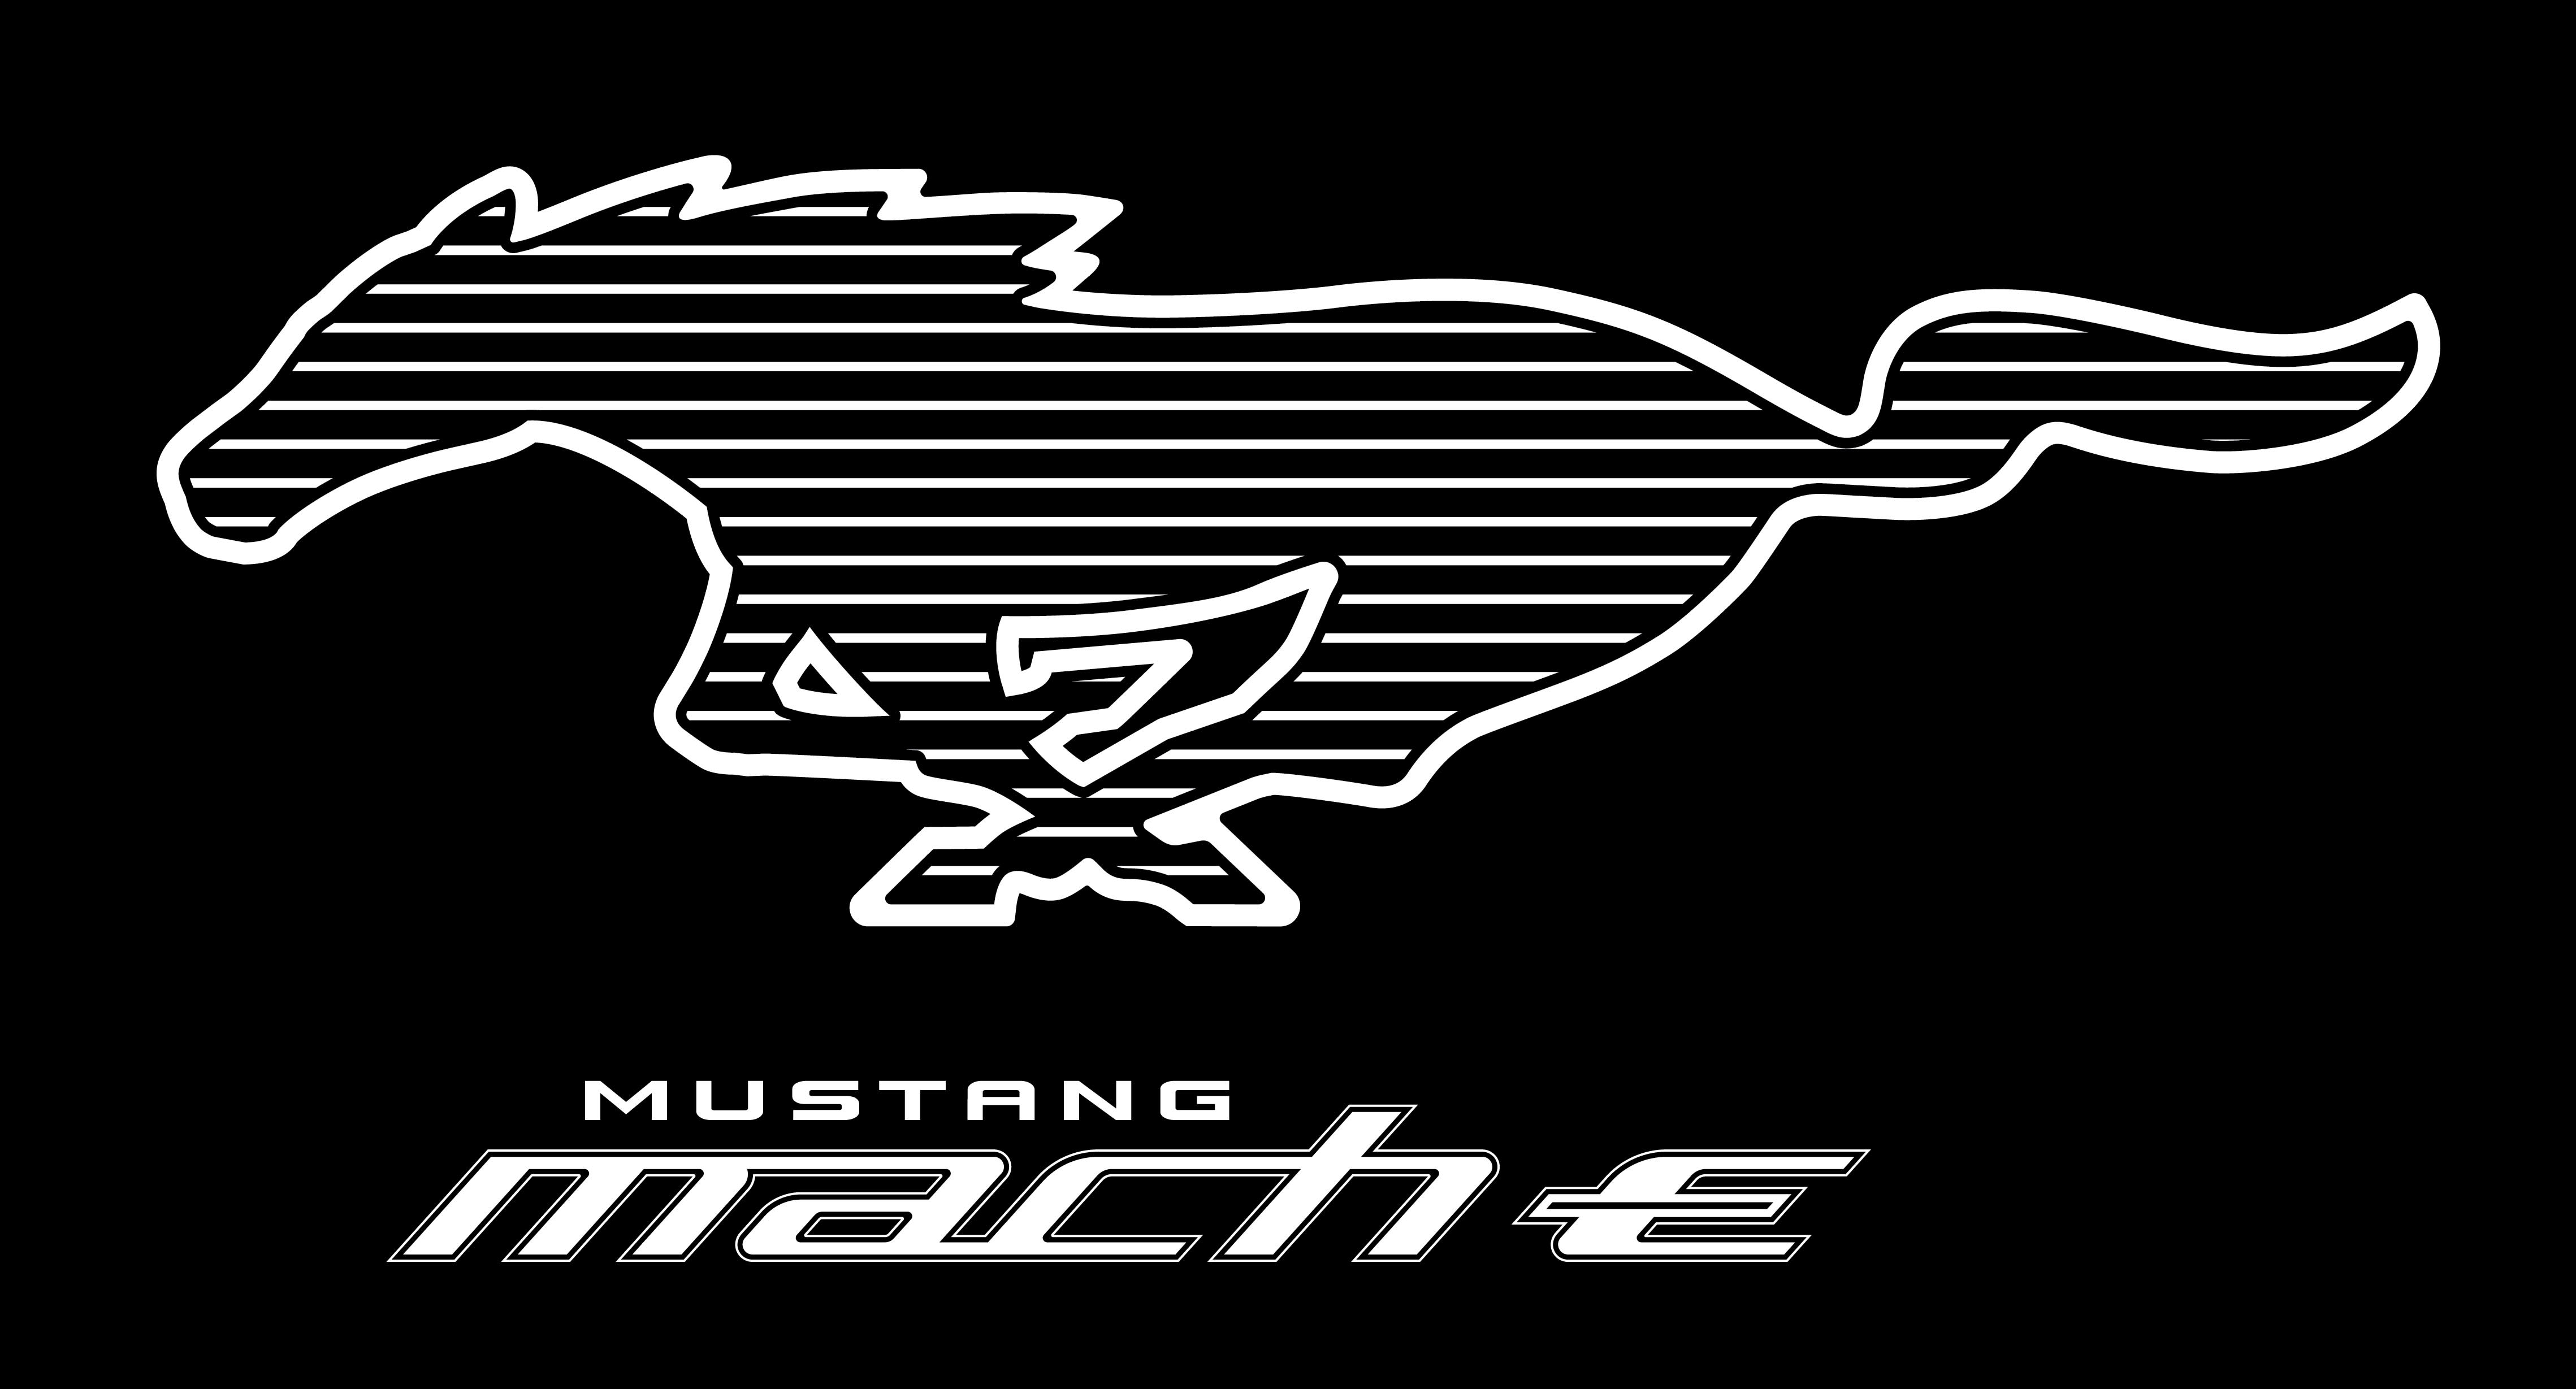 Mustang Manufacturing Company Pony